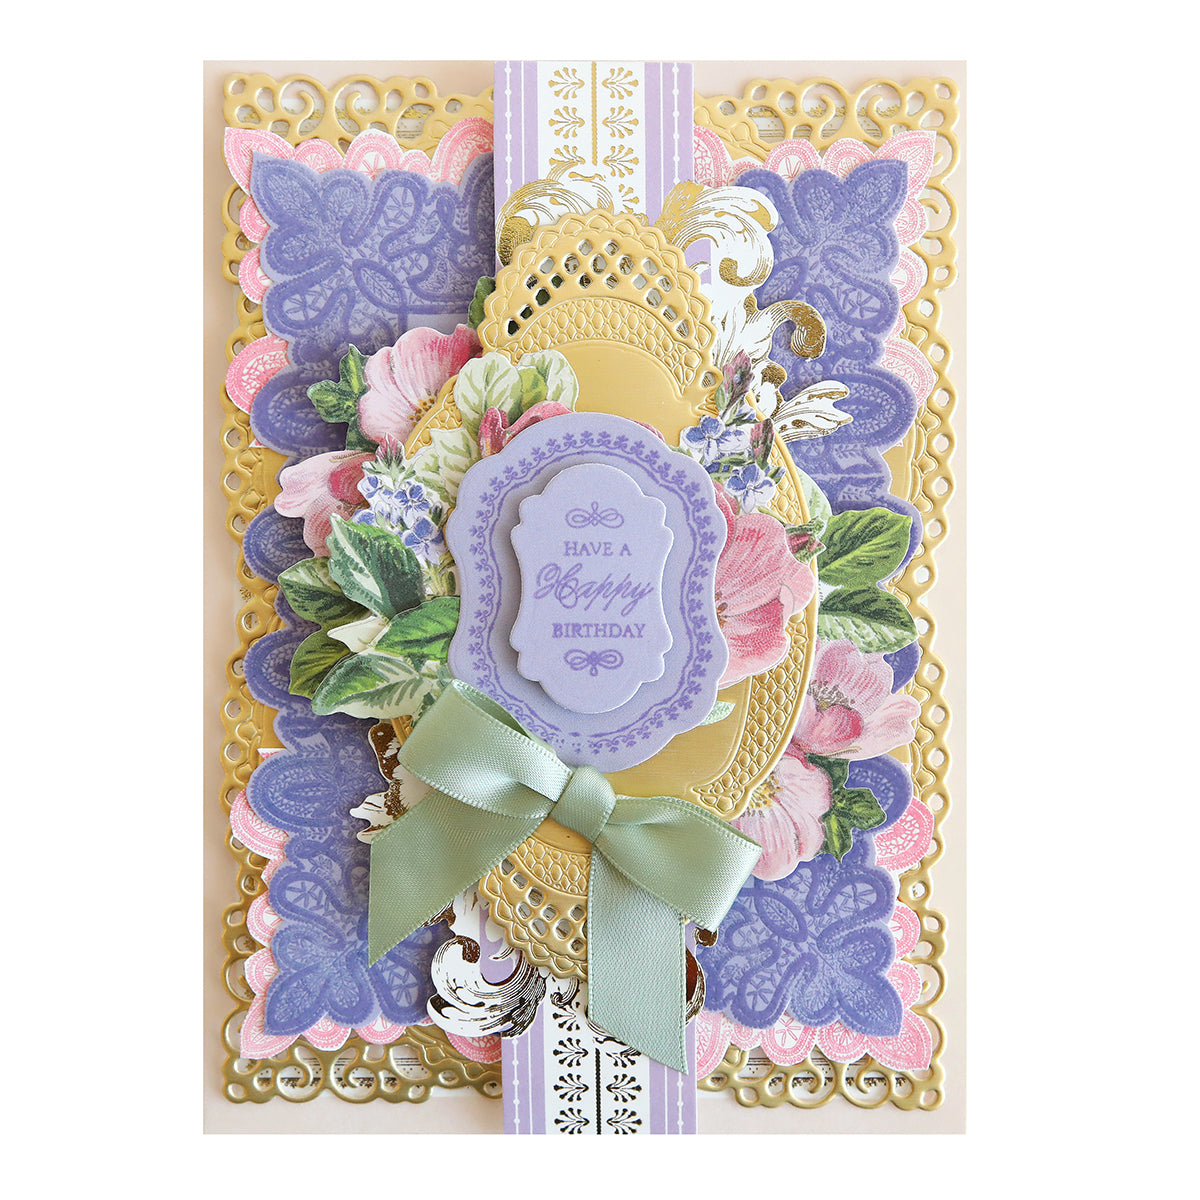 A Perfect Palette Inks adorned with golden flowers.